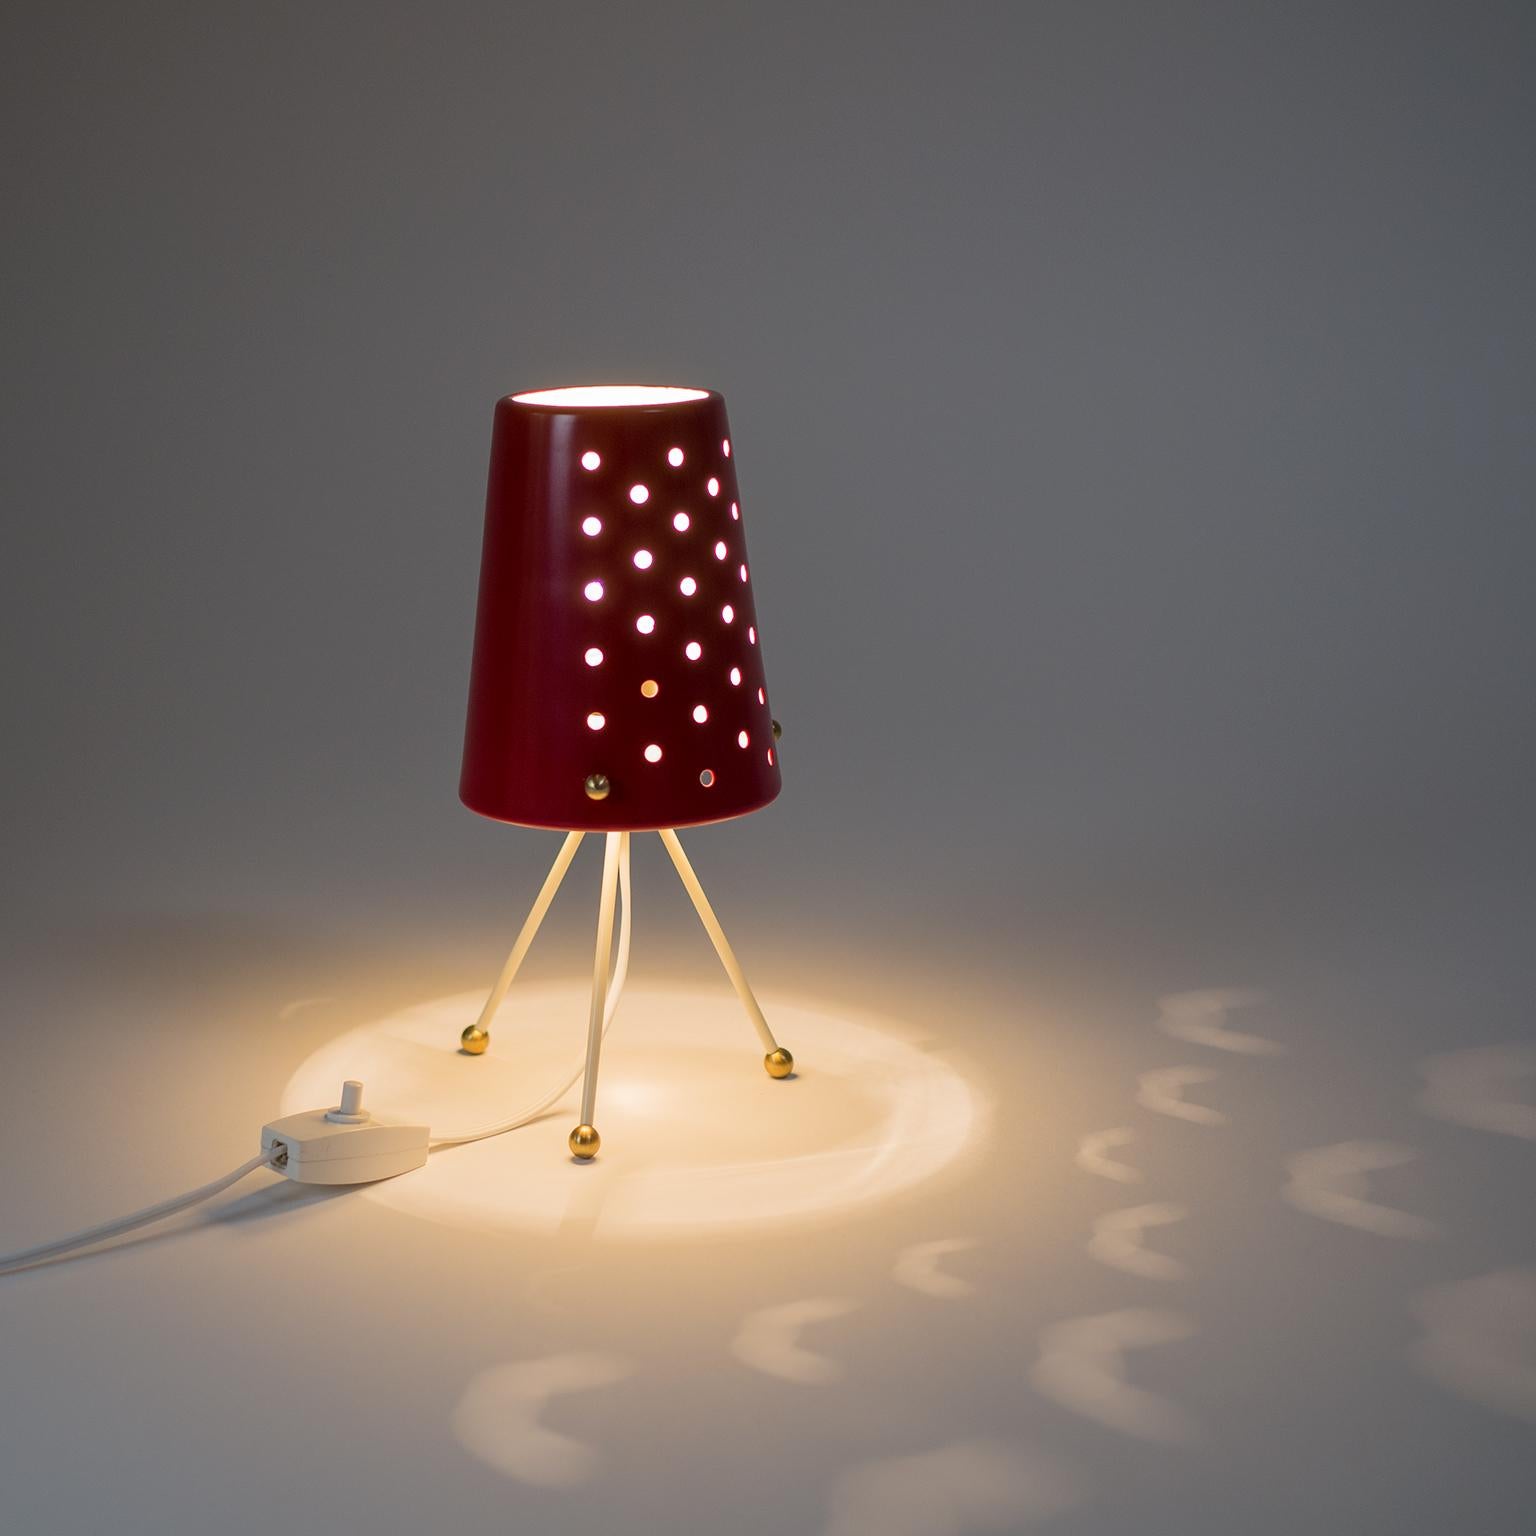 Mid-20th Century Table Lamp with Pierced Red Shade and Brass Details, 1950s